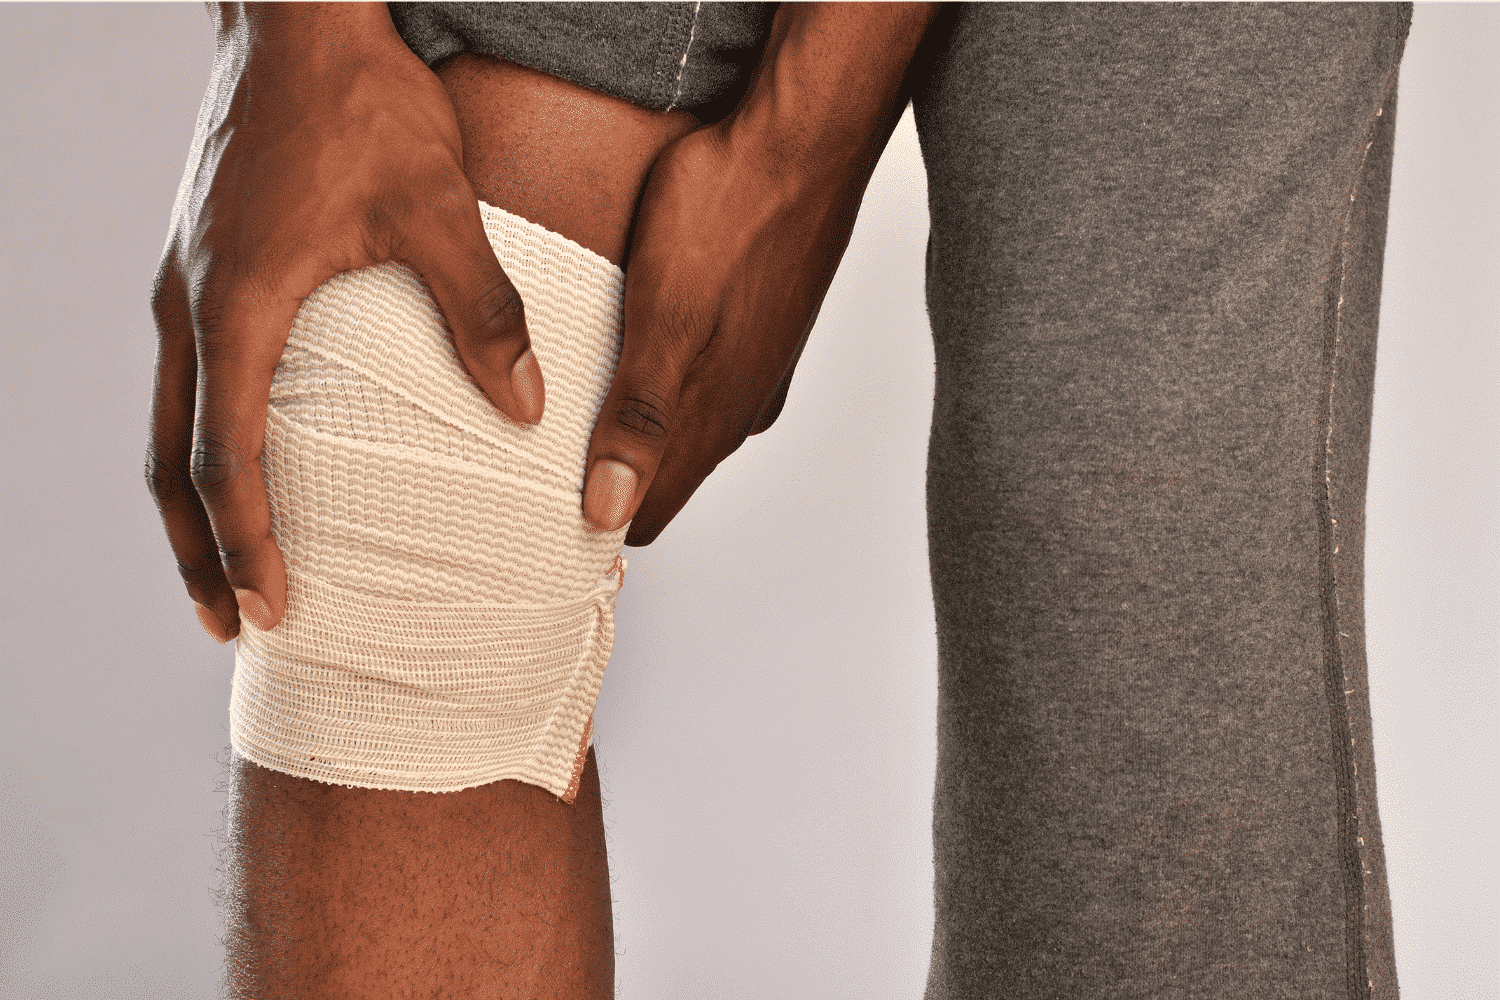 If you have a knee injury, it is important to wrap it. You likely have an ACE bandage on hand, but you aren’t sure how to use it. Learn how to wrap your knee injury. Then visit a New York knee injury doctor to diagnose and treat your injury.